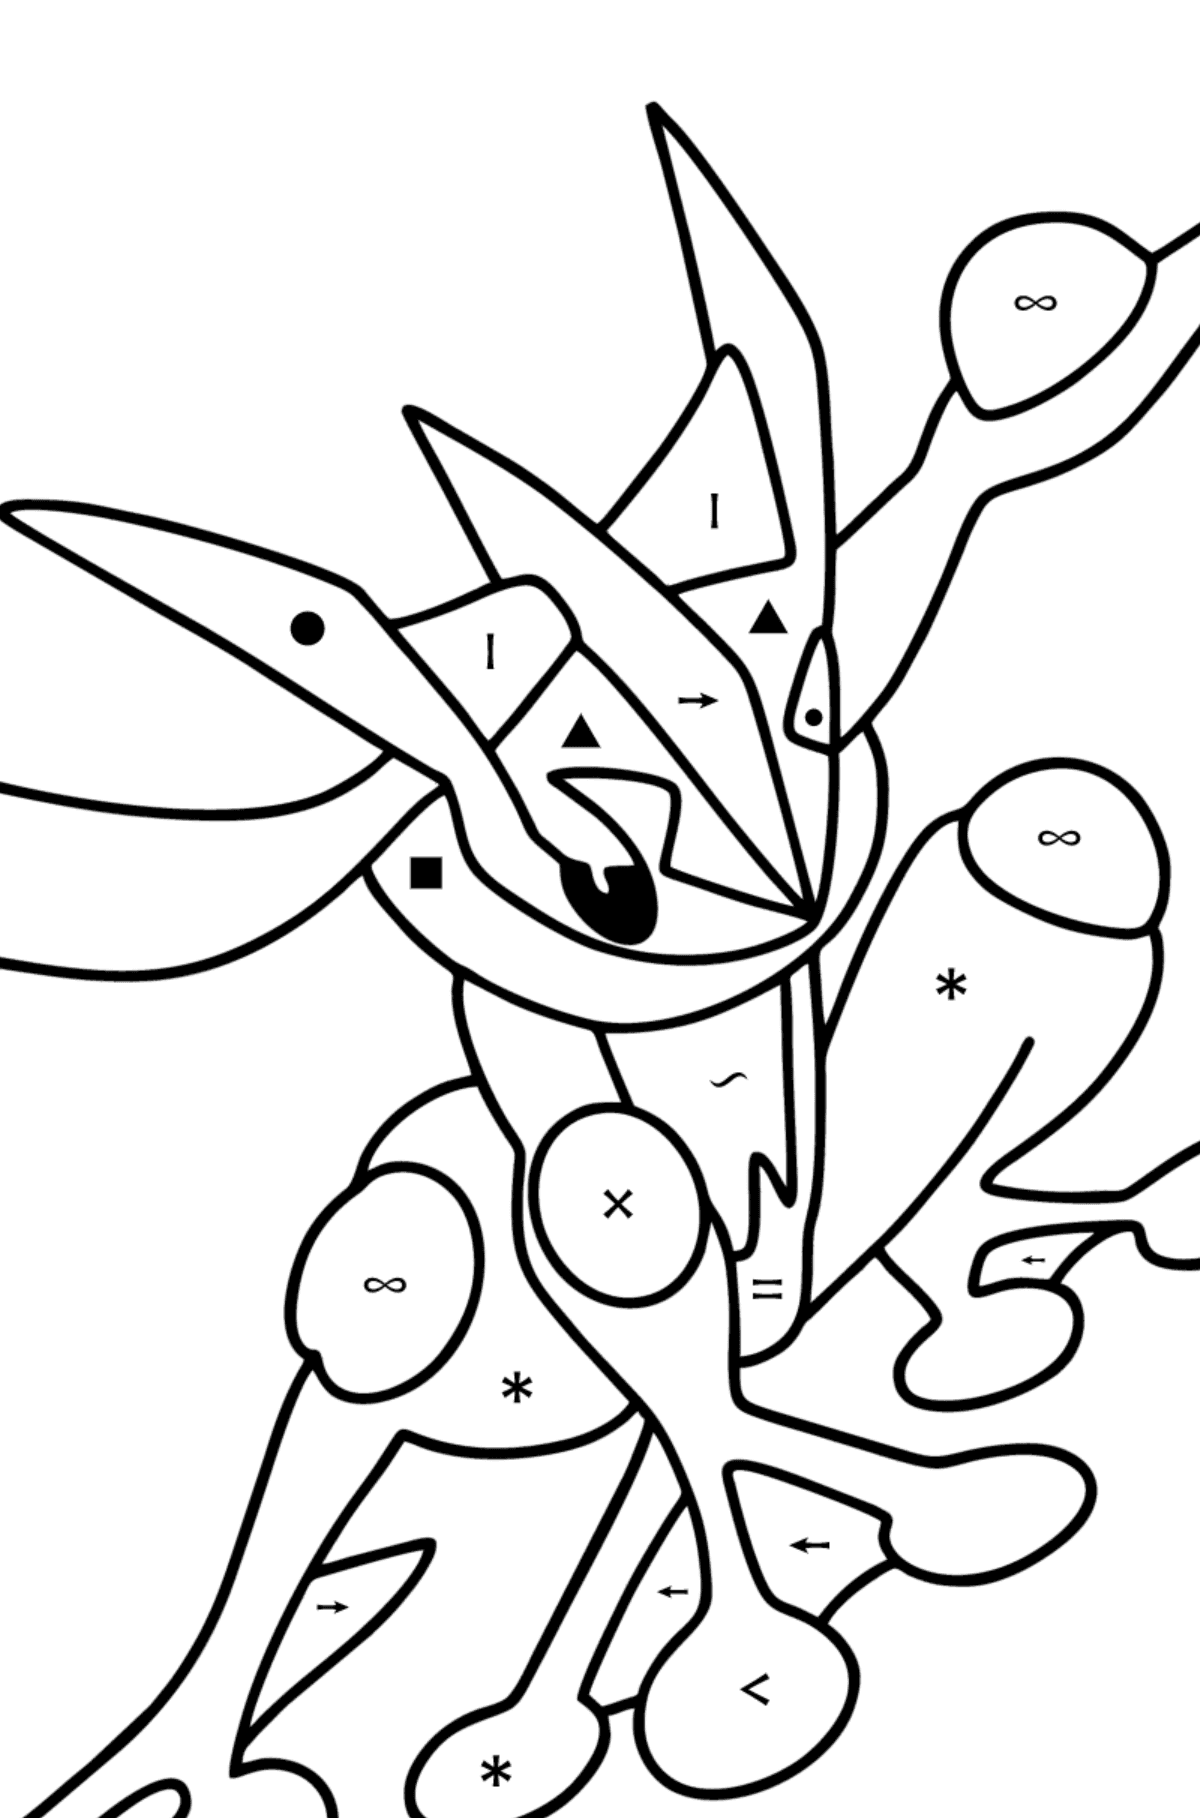 Coloring page Pokemon Go Greninja - Coloring by Symbols for Kids